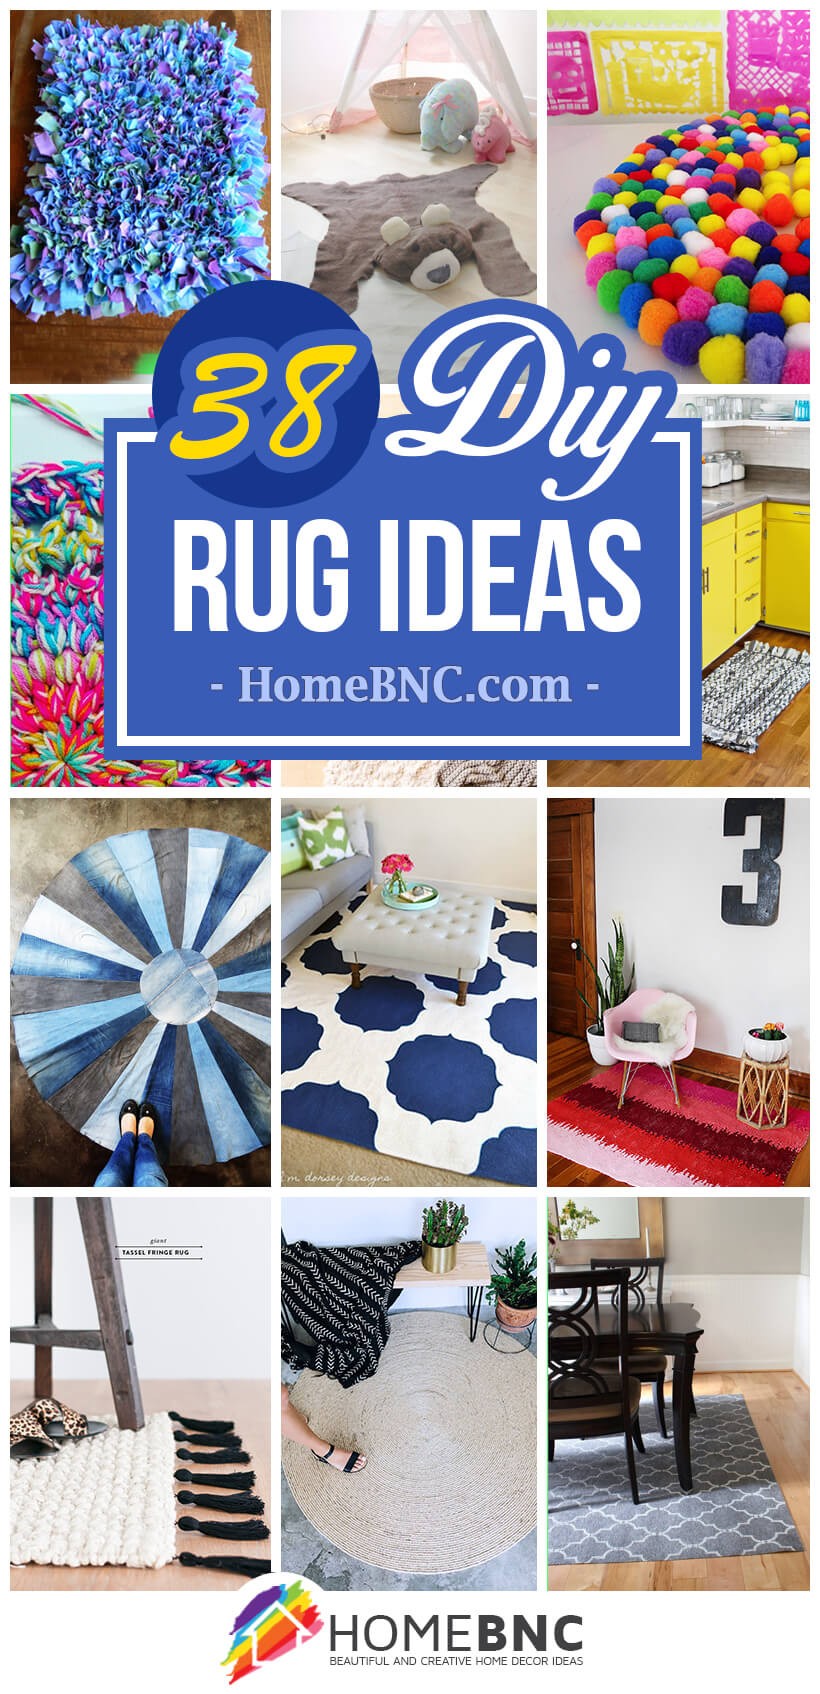 38 Best DIY Rug Ideas and Designs for 2019